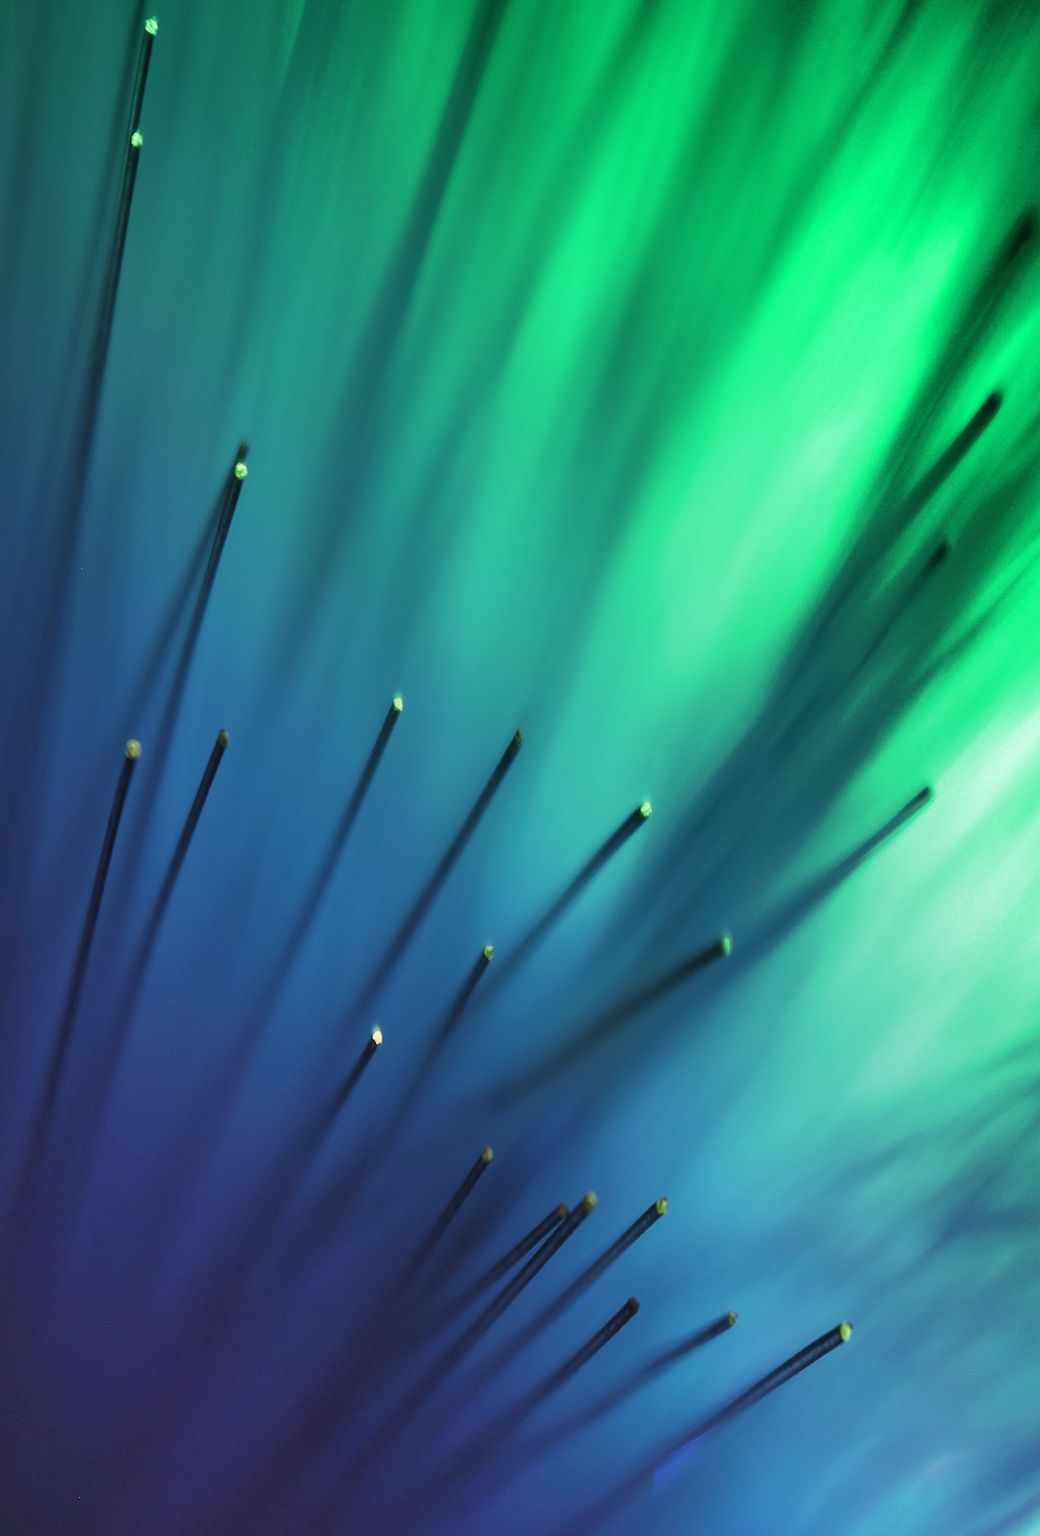 Leaked HTC M8 Default Wallpapers for iPhone 5/5c/5s | thePADblog